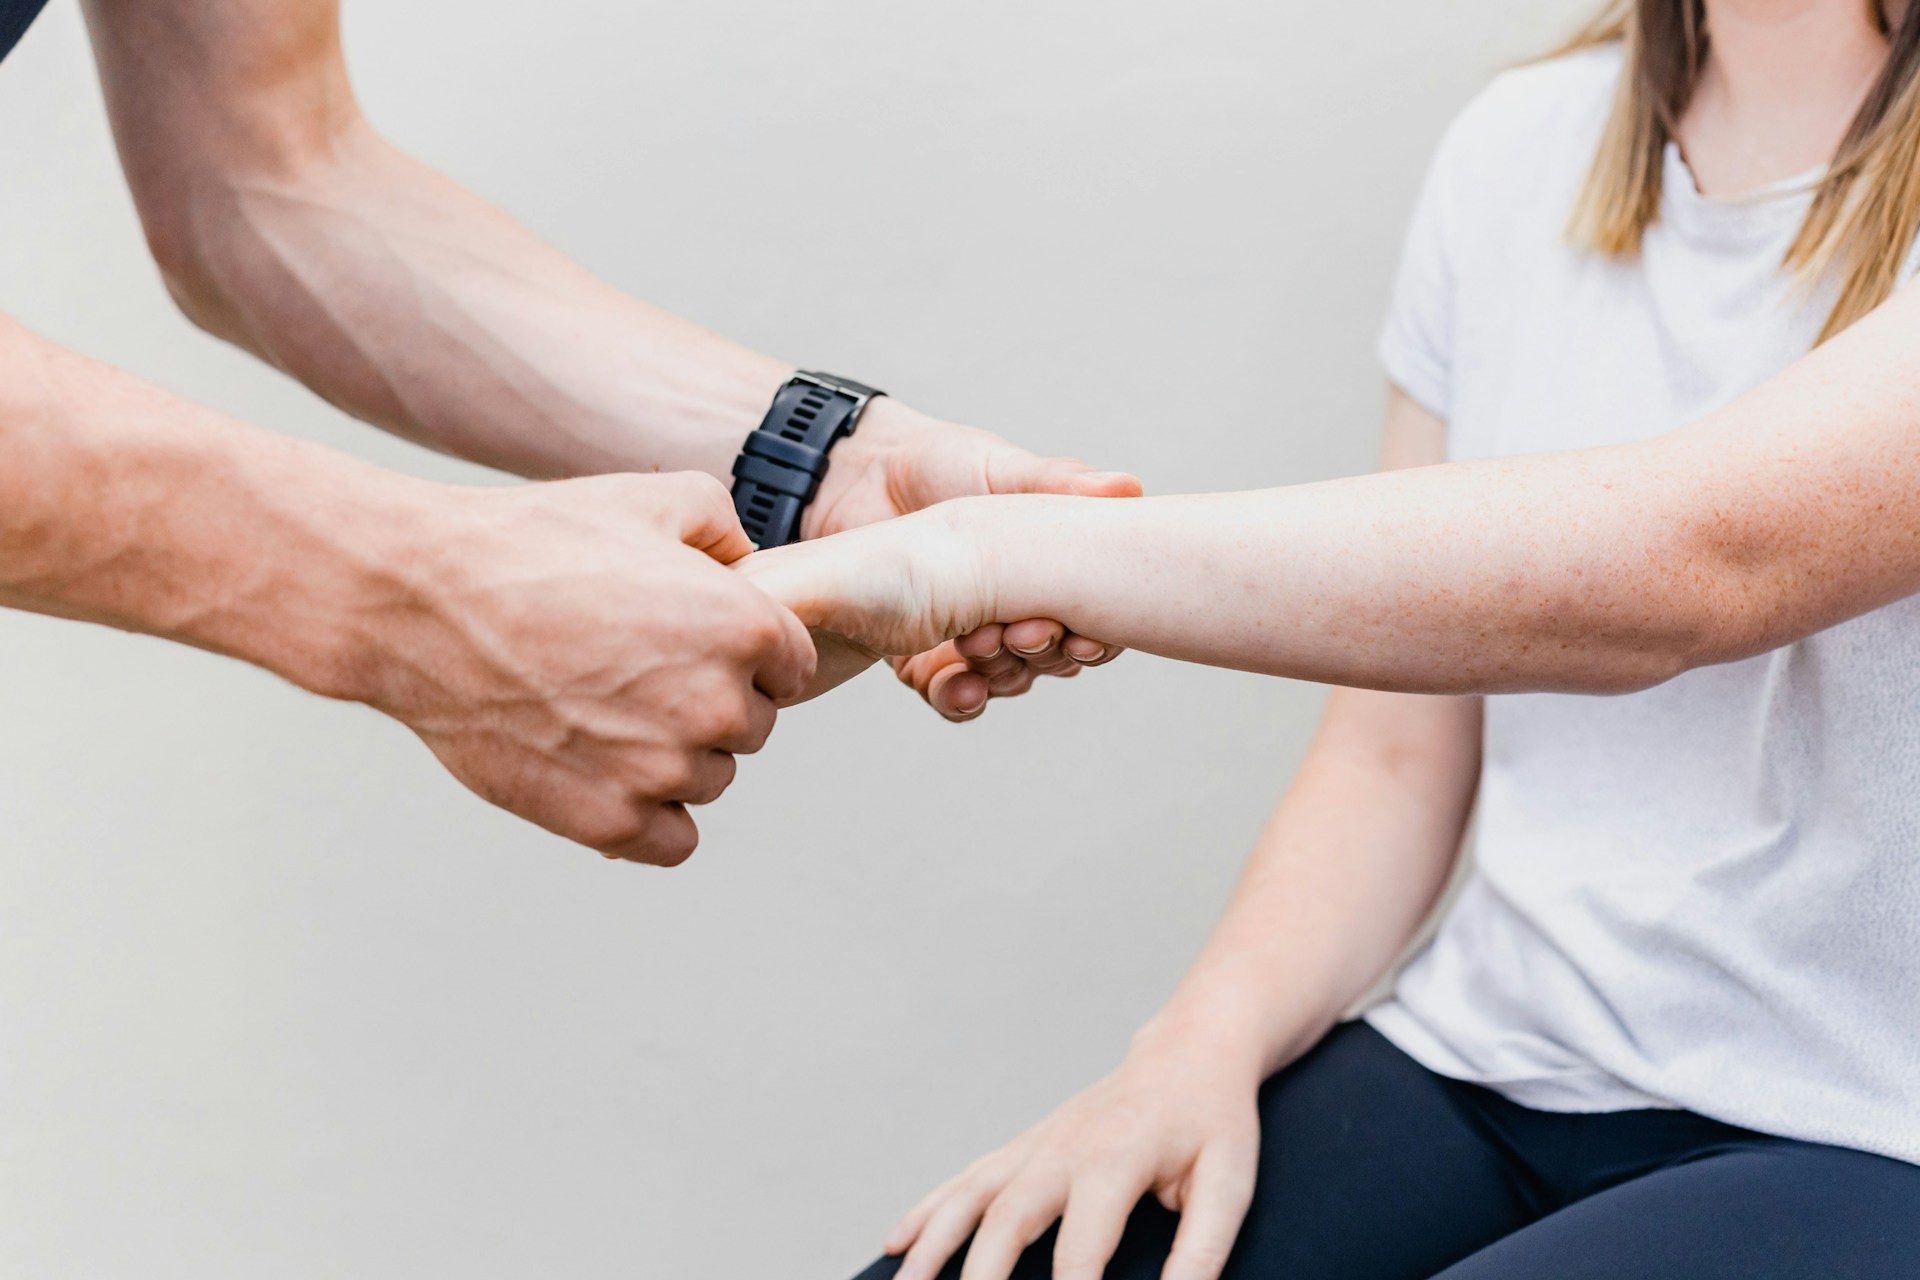 Chiropractor adjusting the wrist joints of a young woman